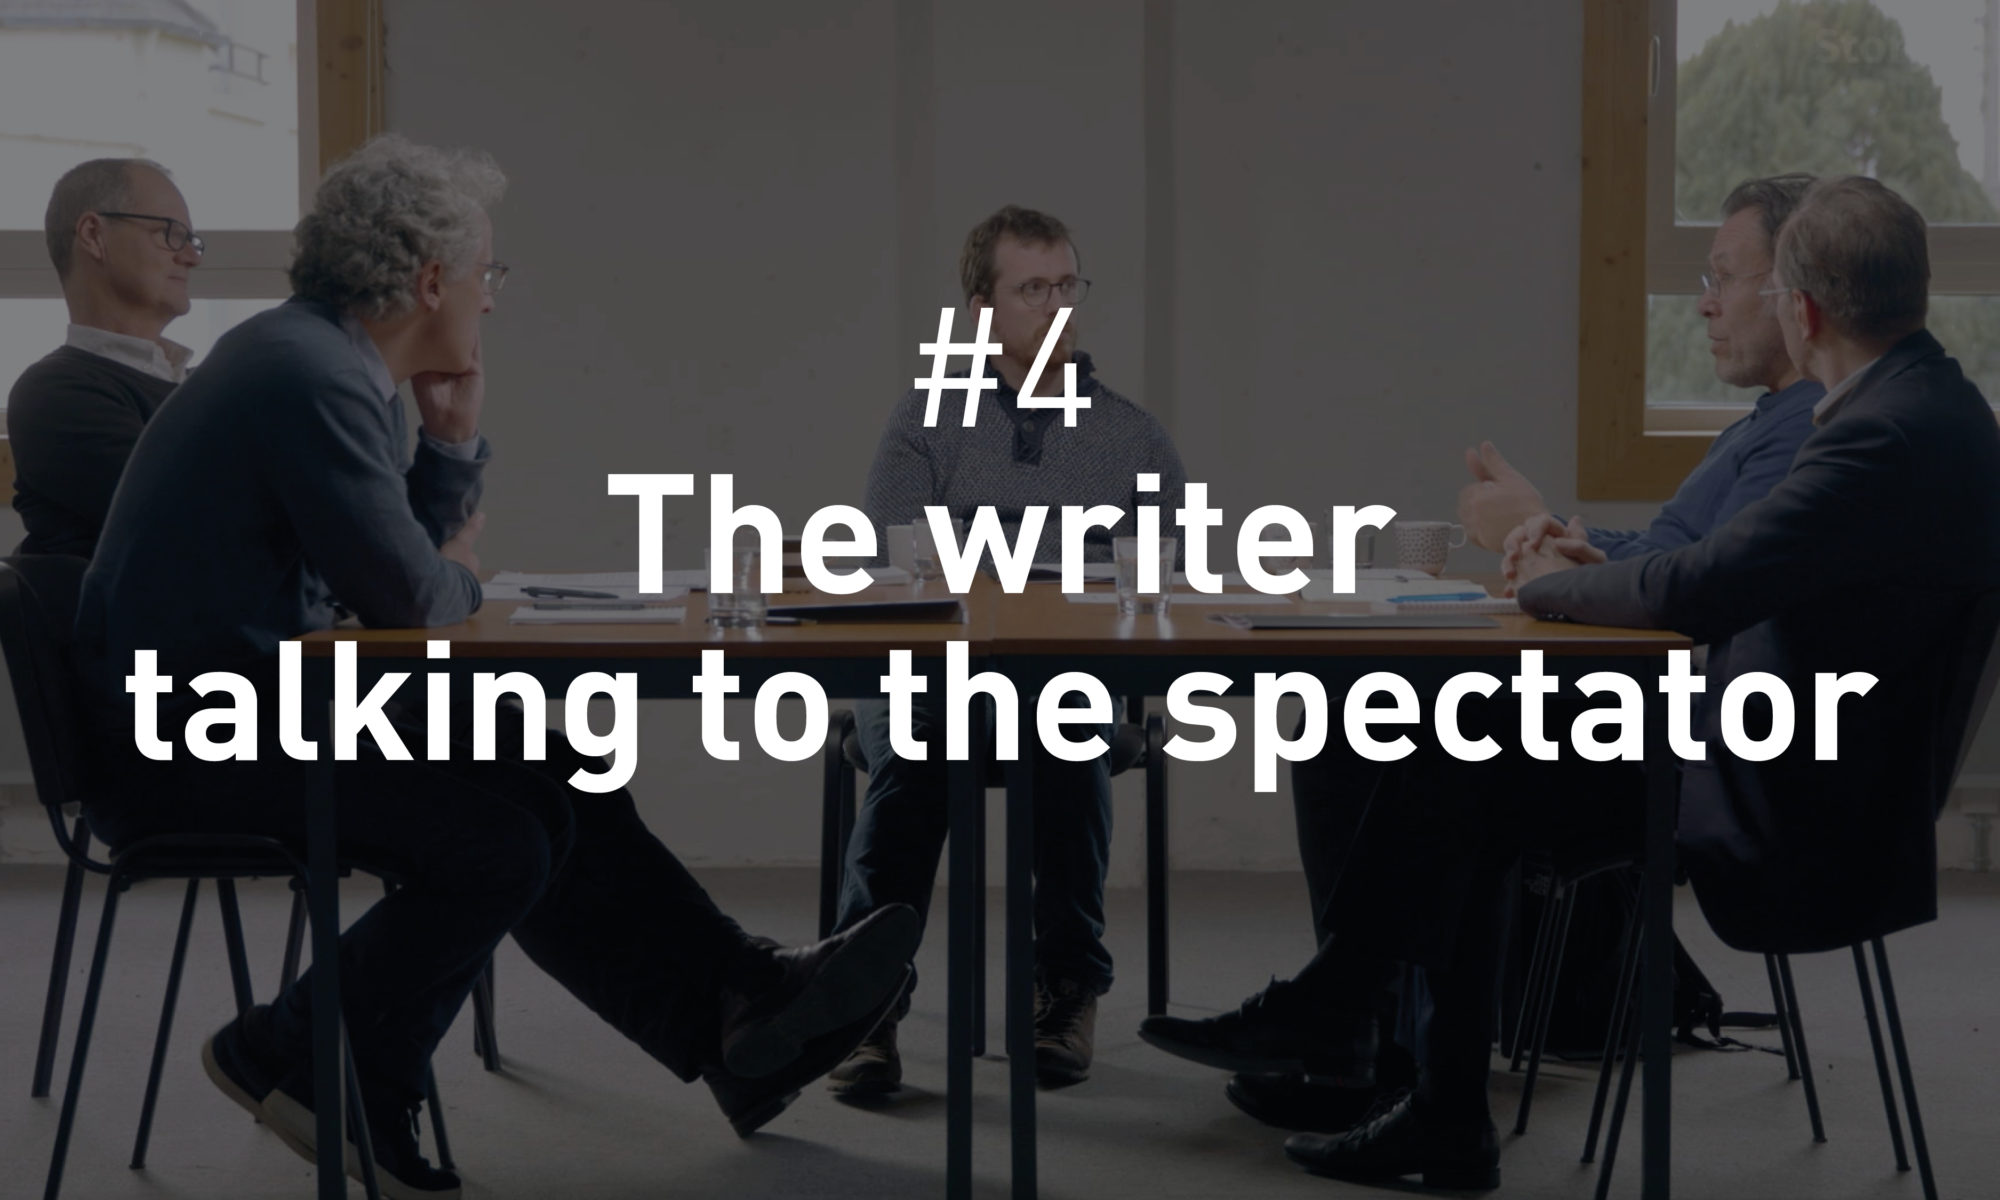 The writer talking to the spectator